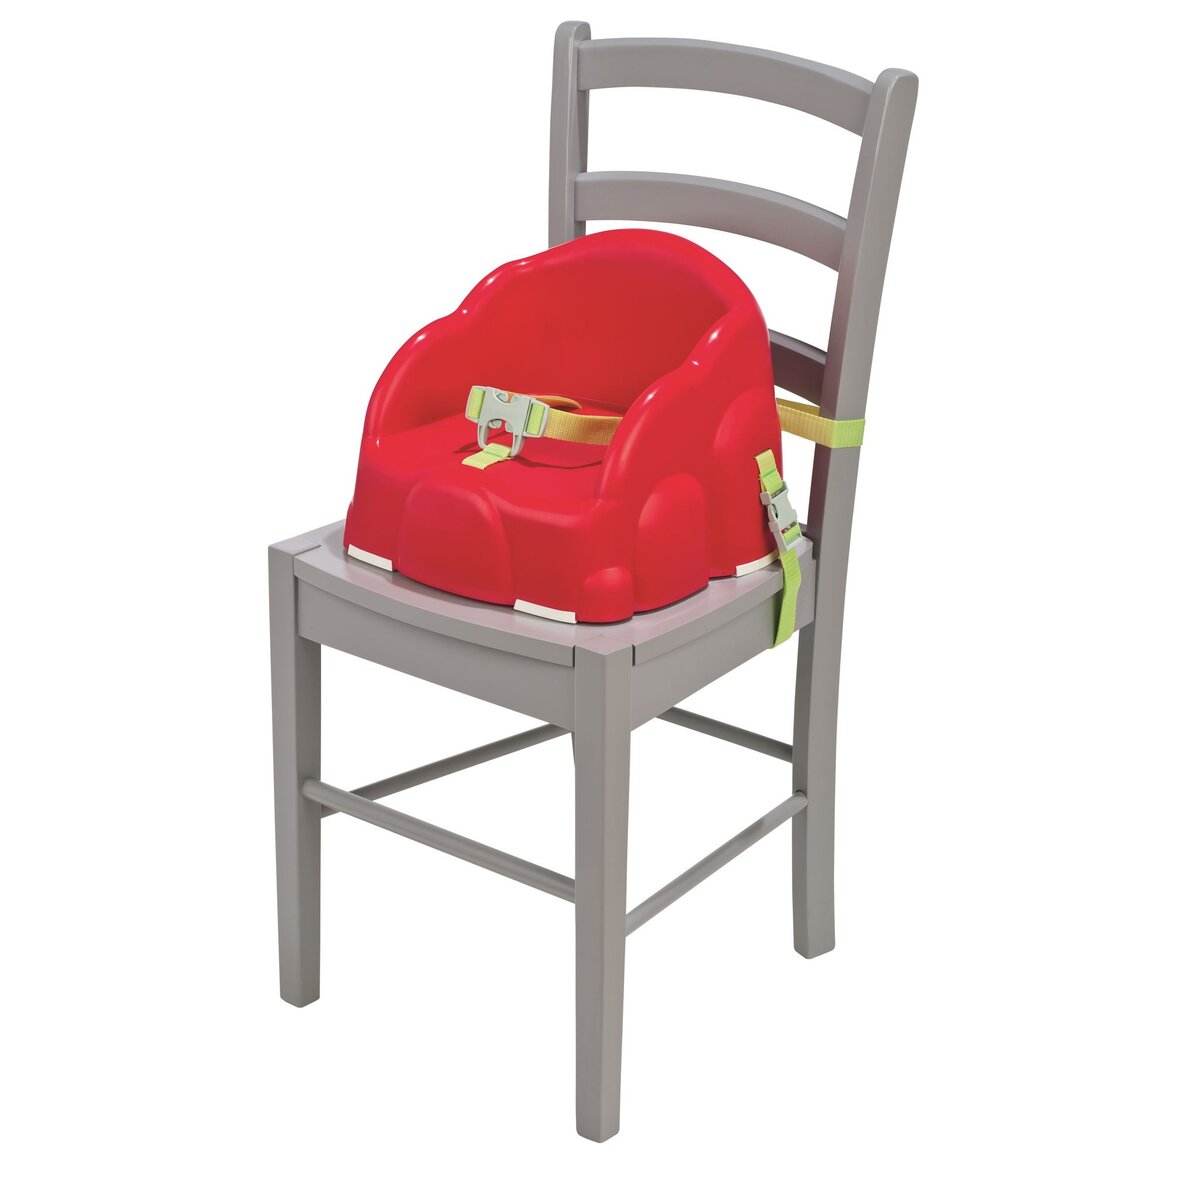 SAFETY FIRST Rehausseur de table Easy booster